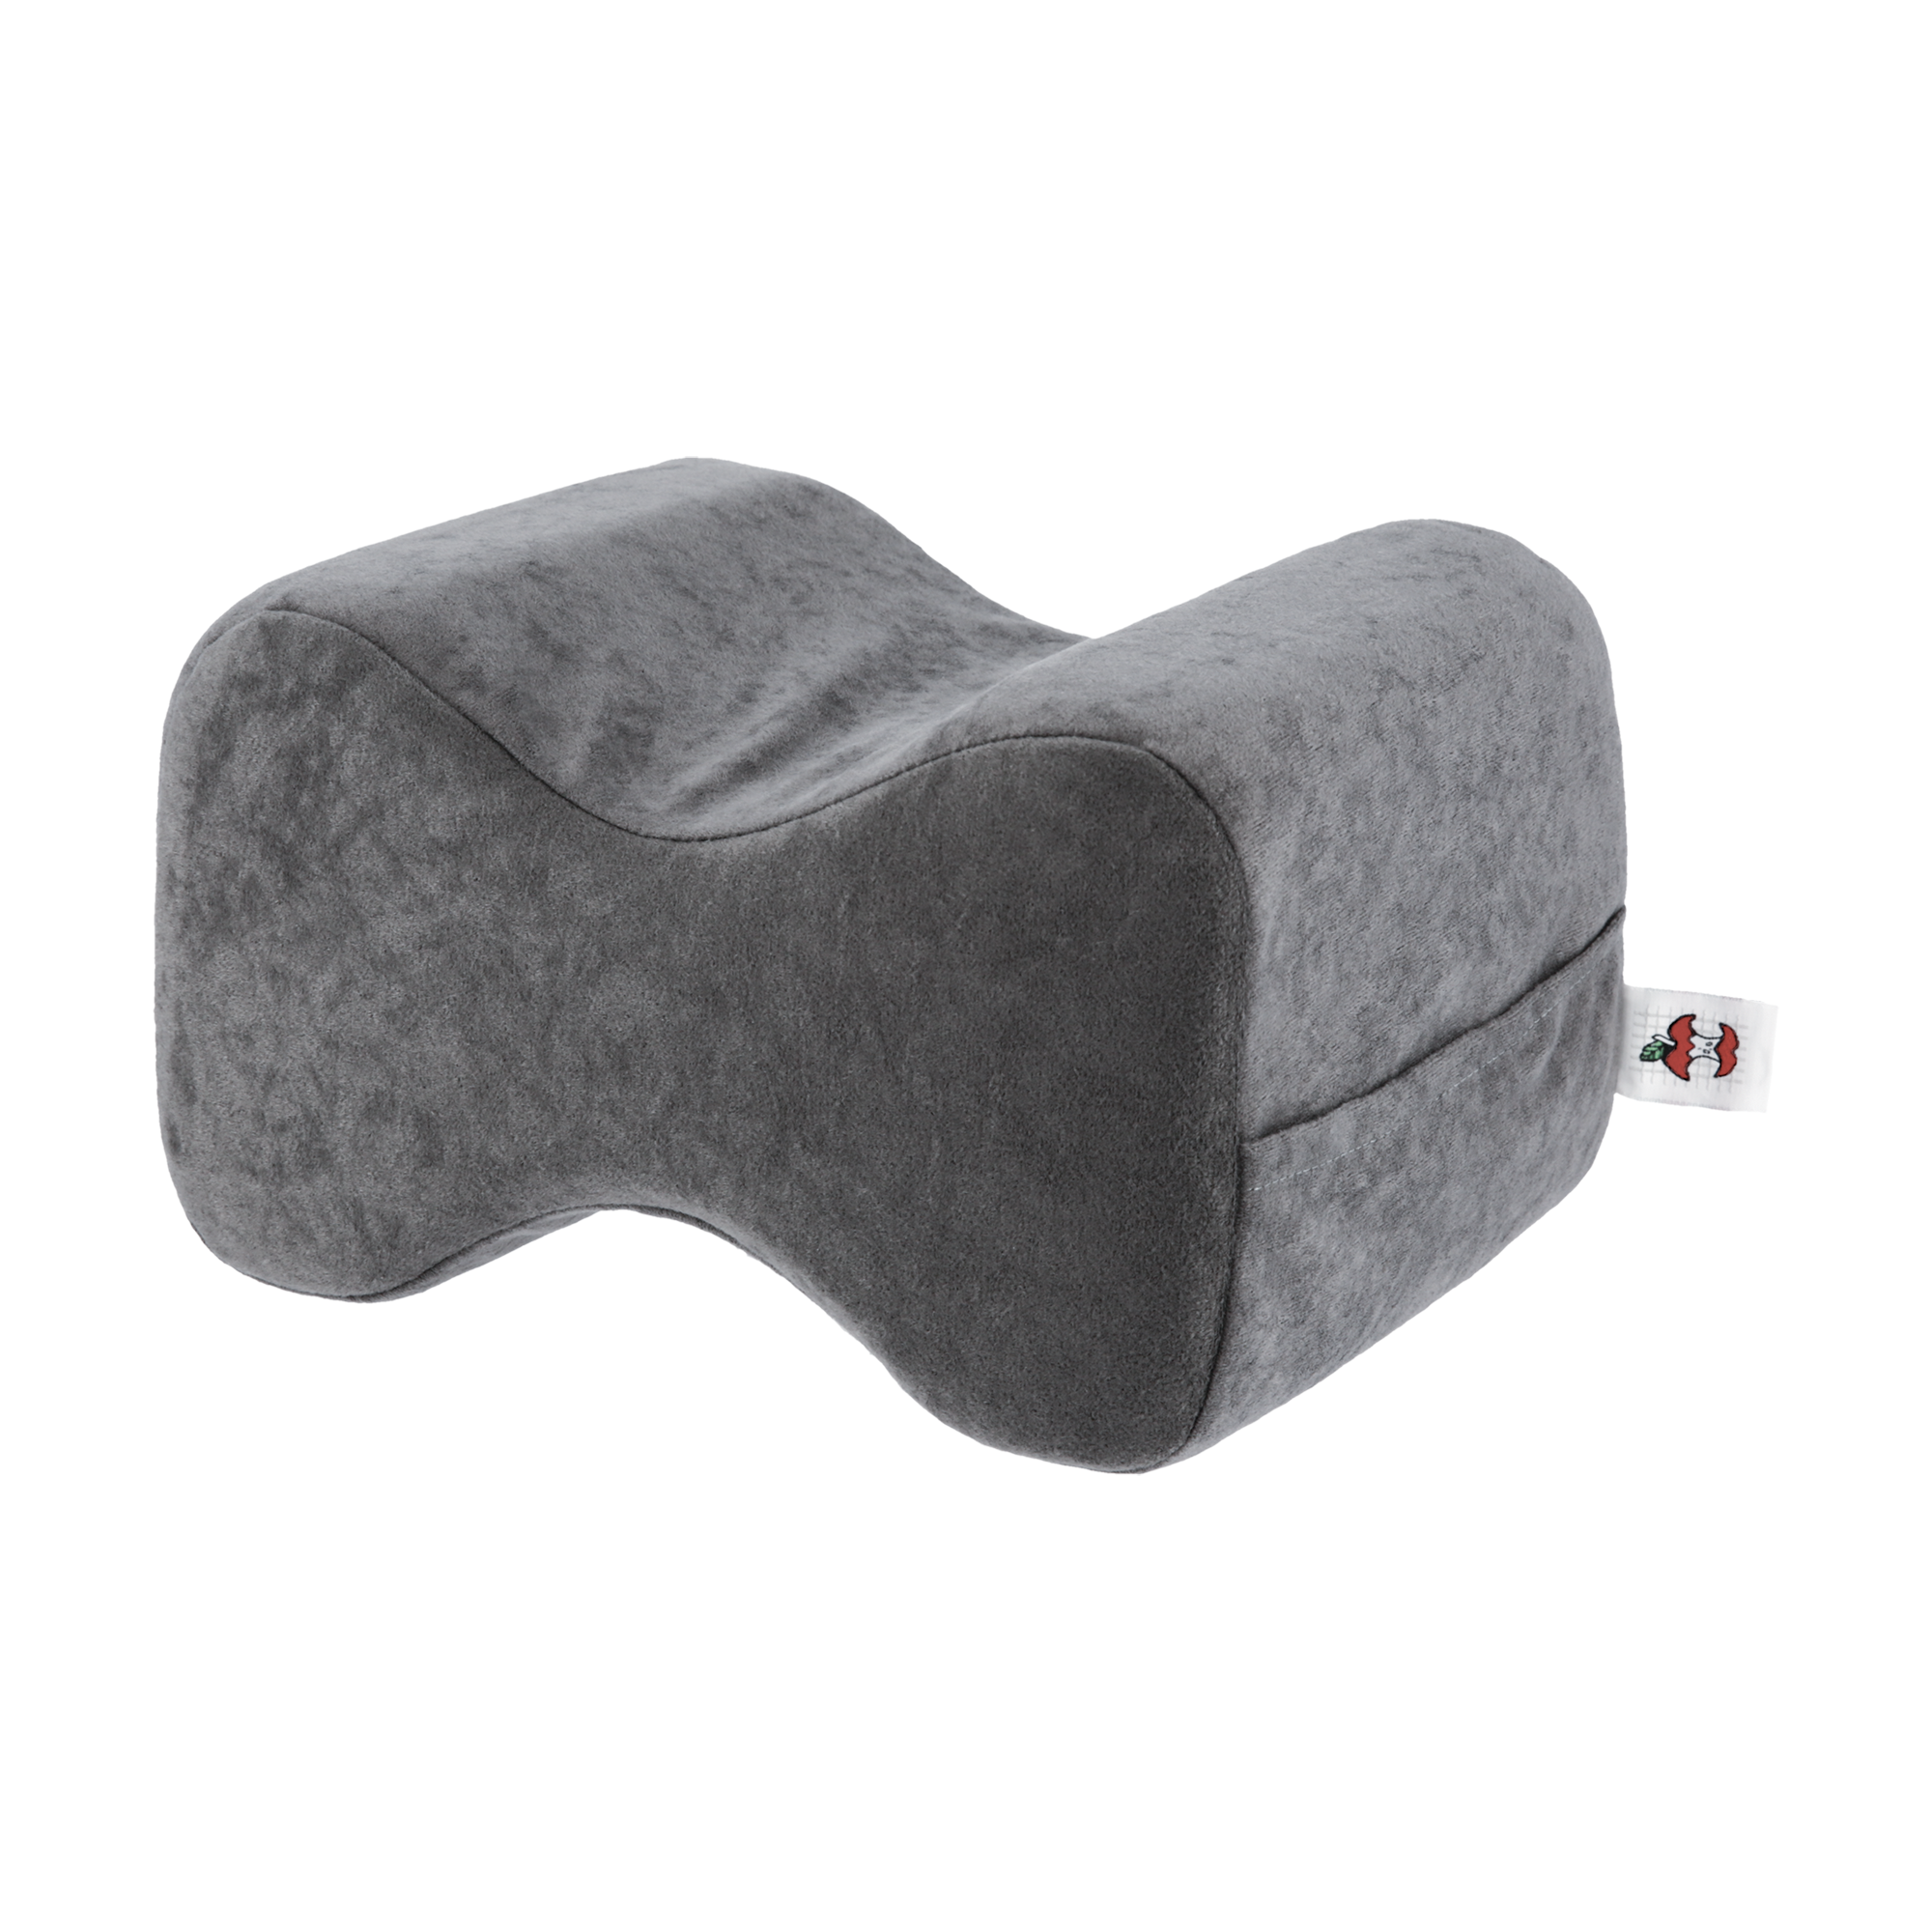 Leg Spacer Positioning Support Pillow - physio supplies canada